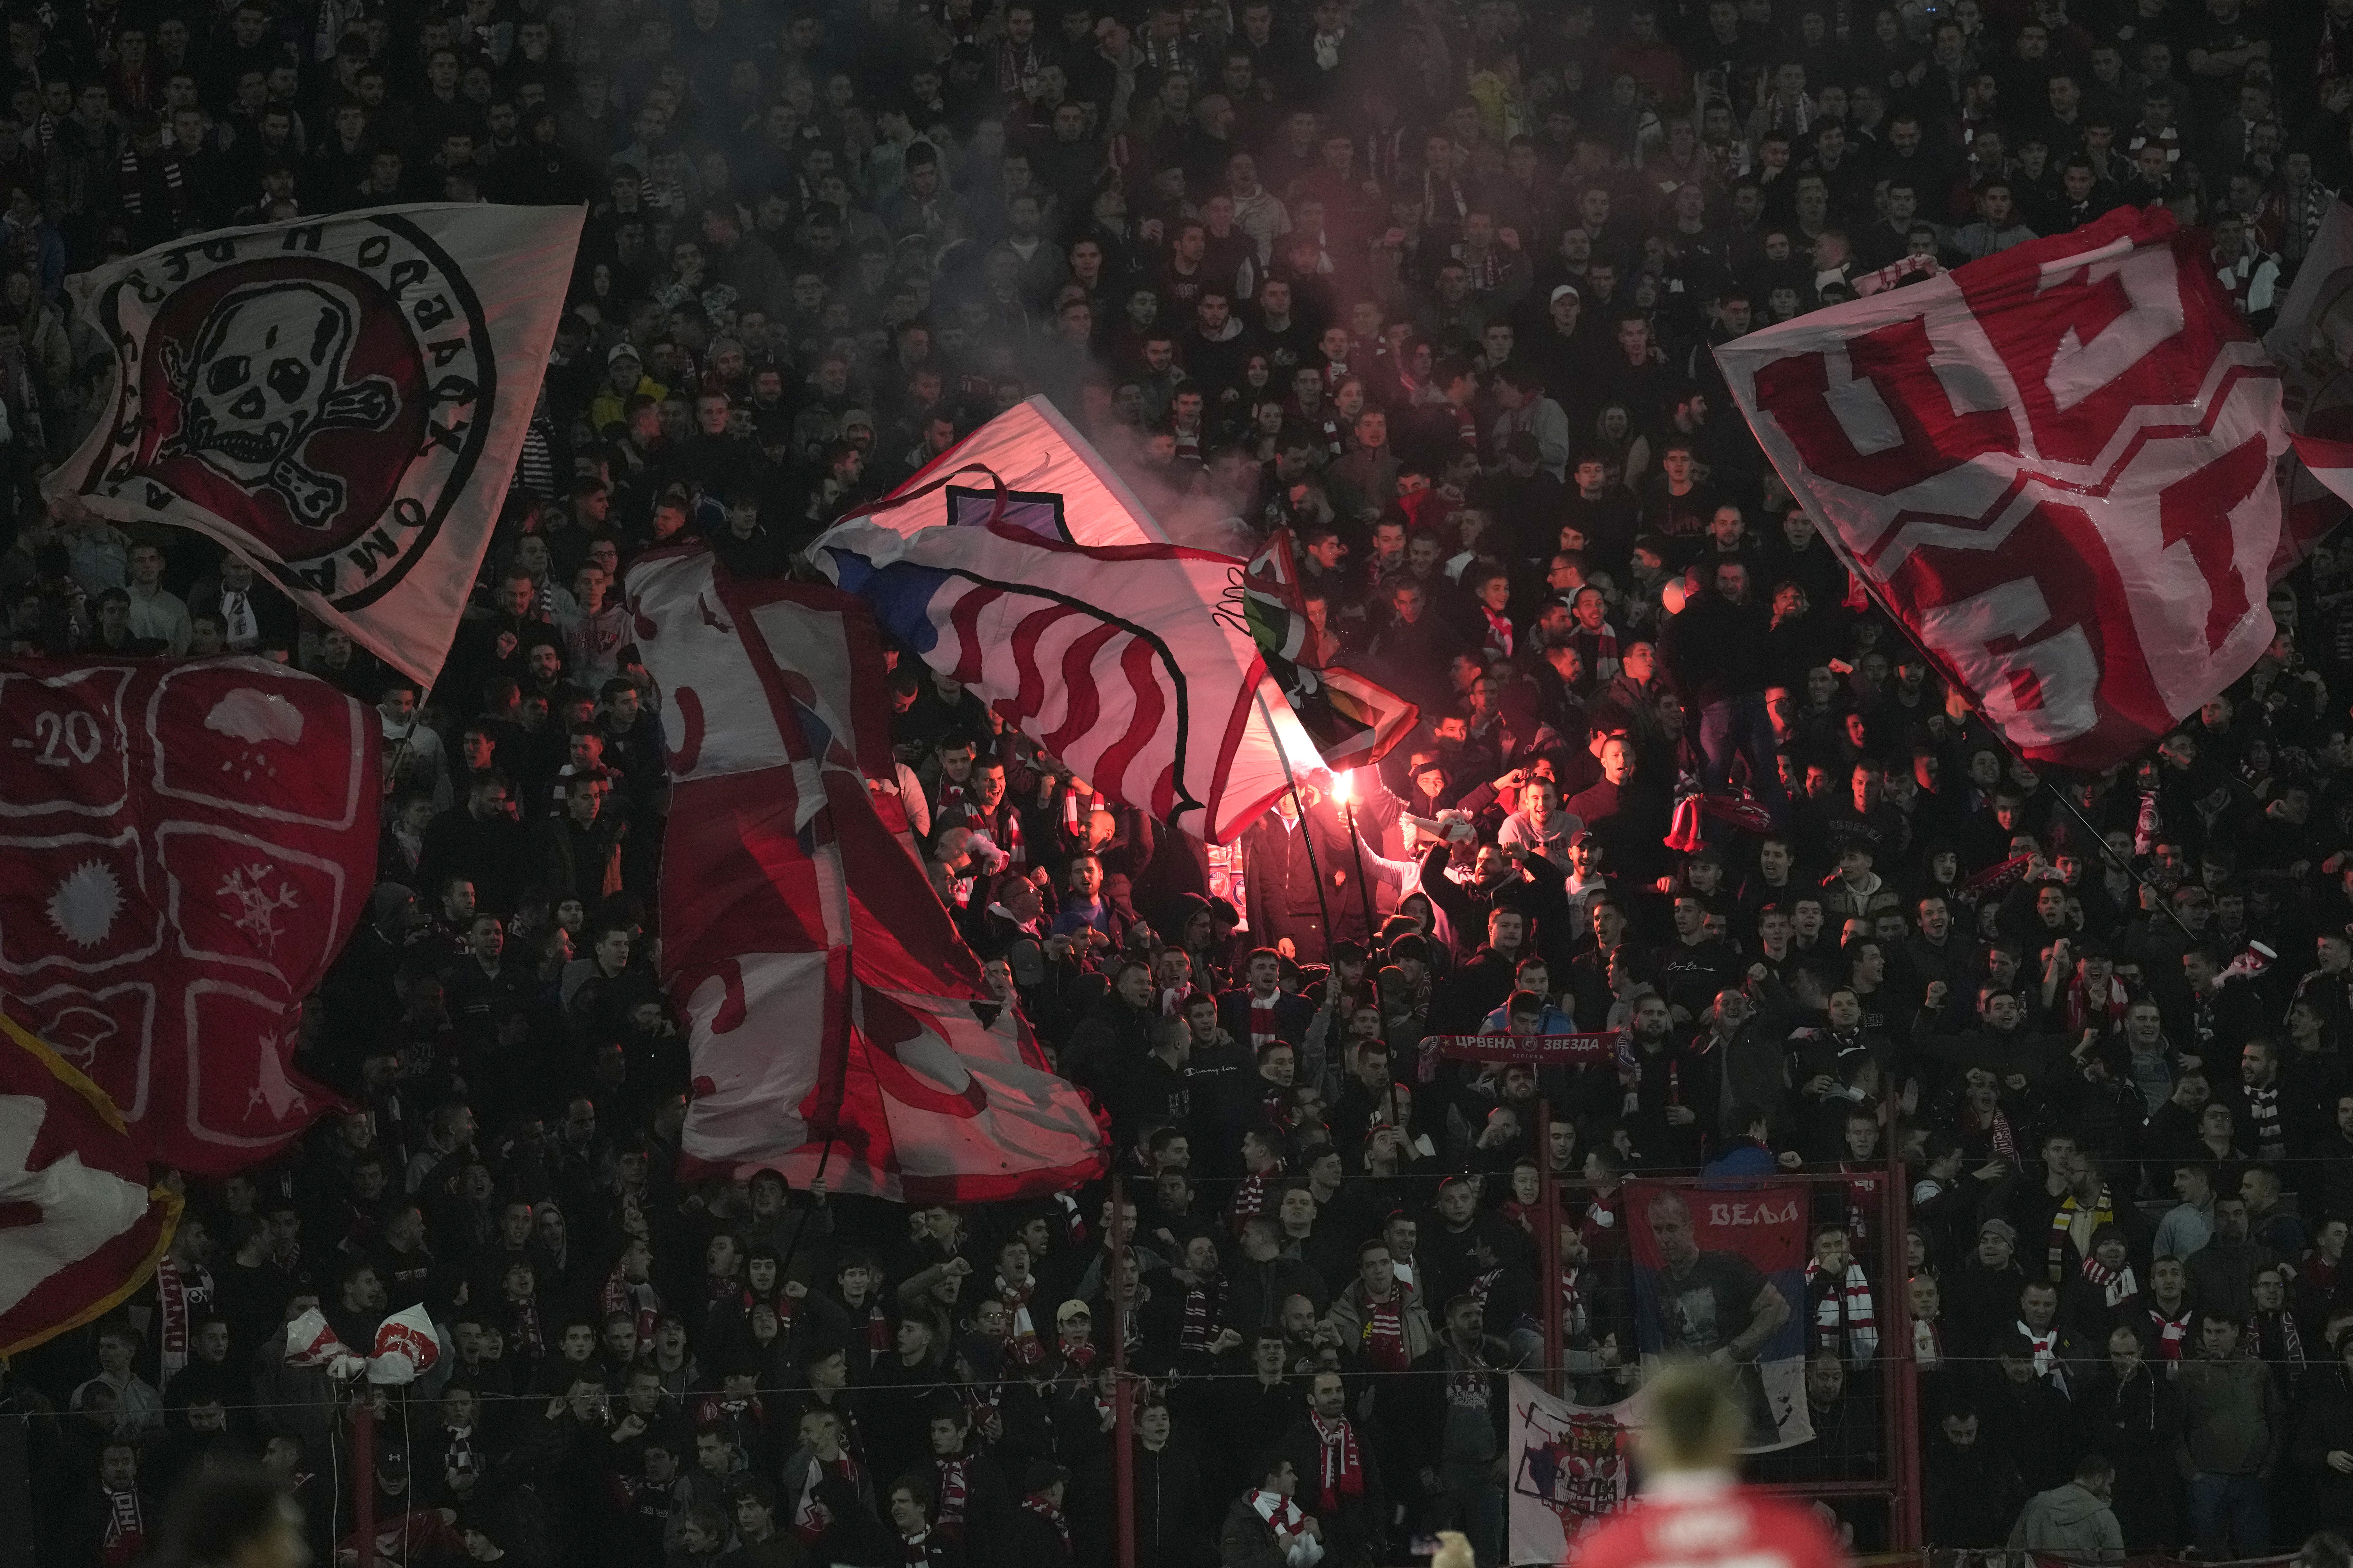 Red Star Belgrade supporters set off flares